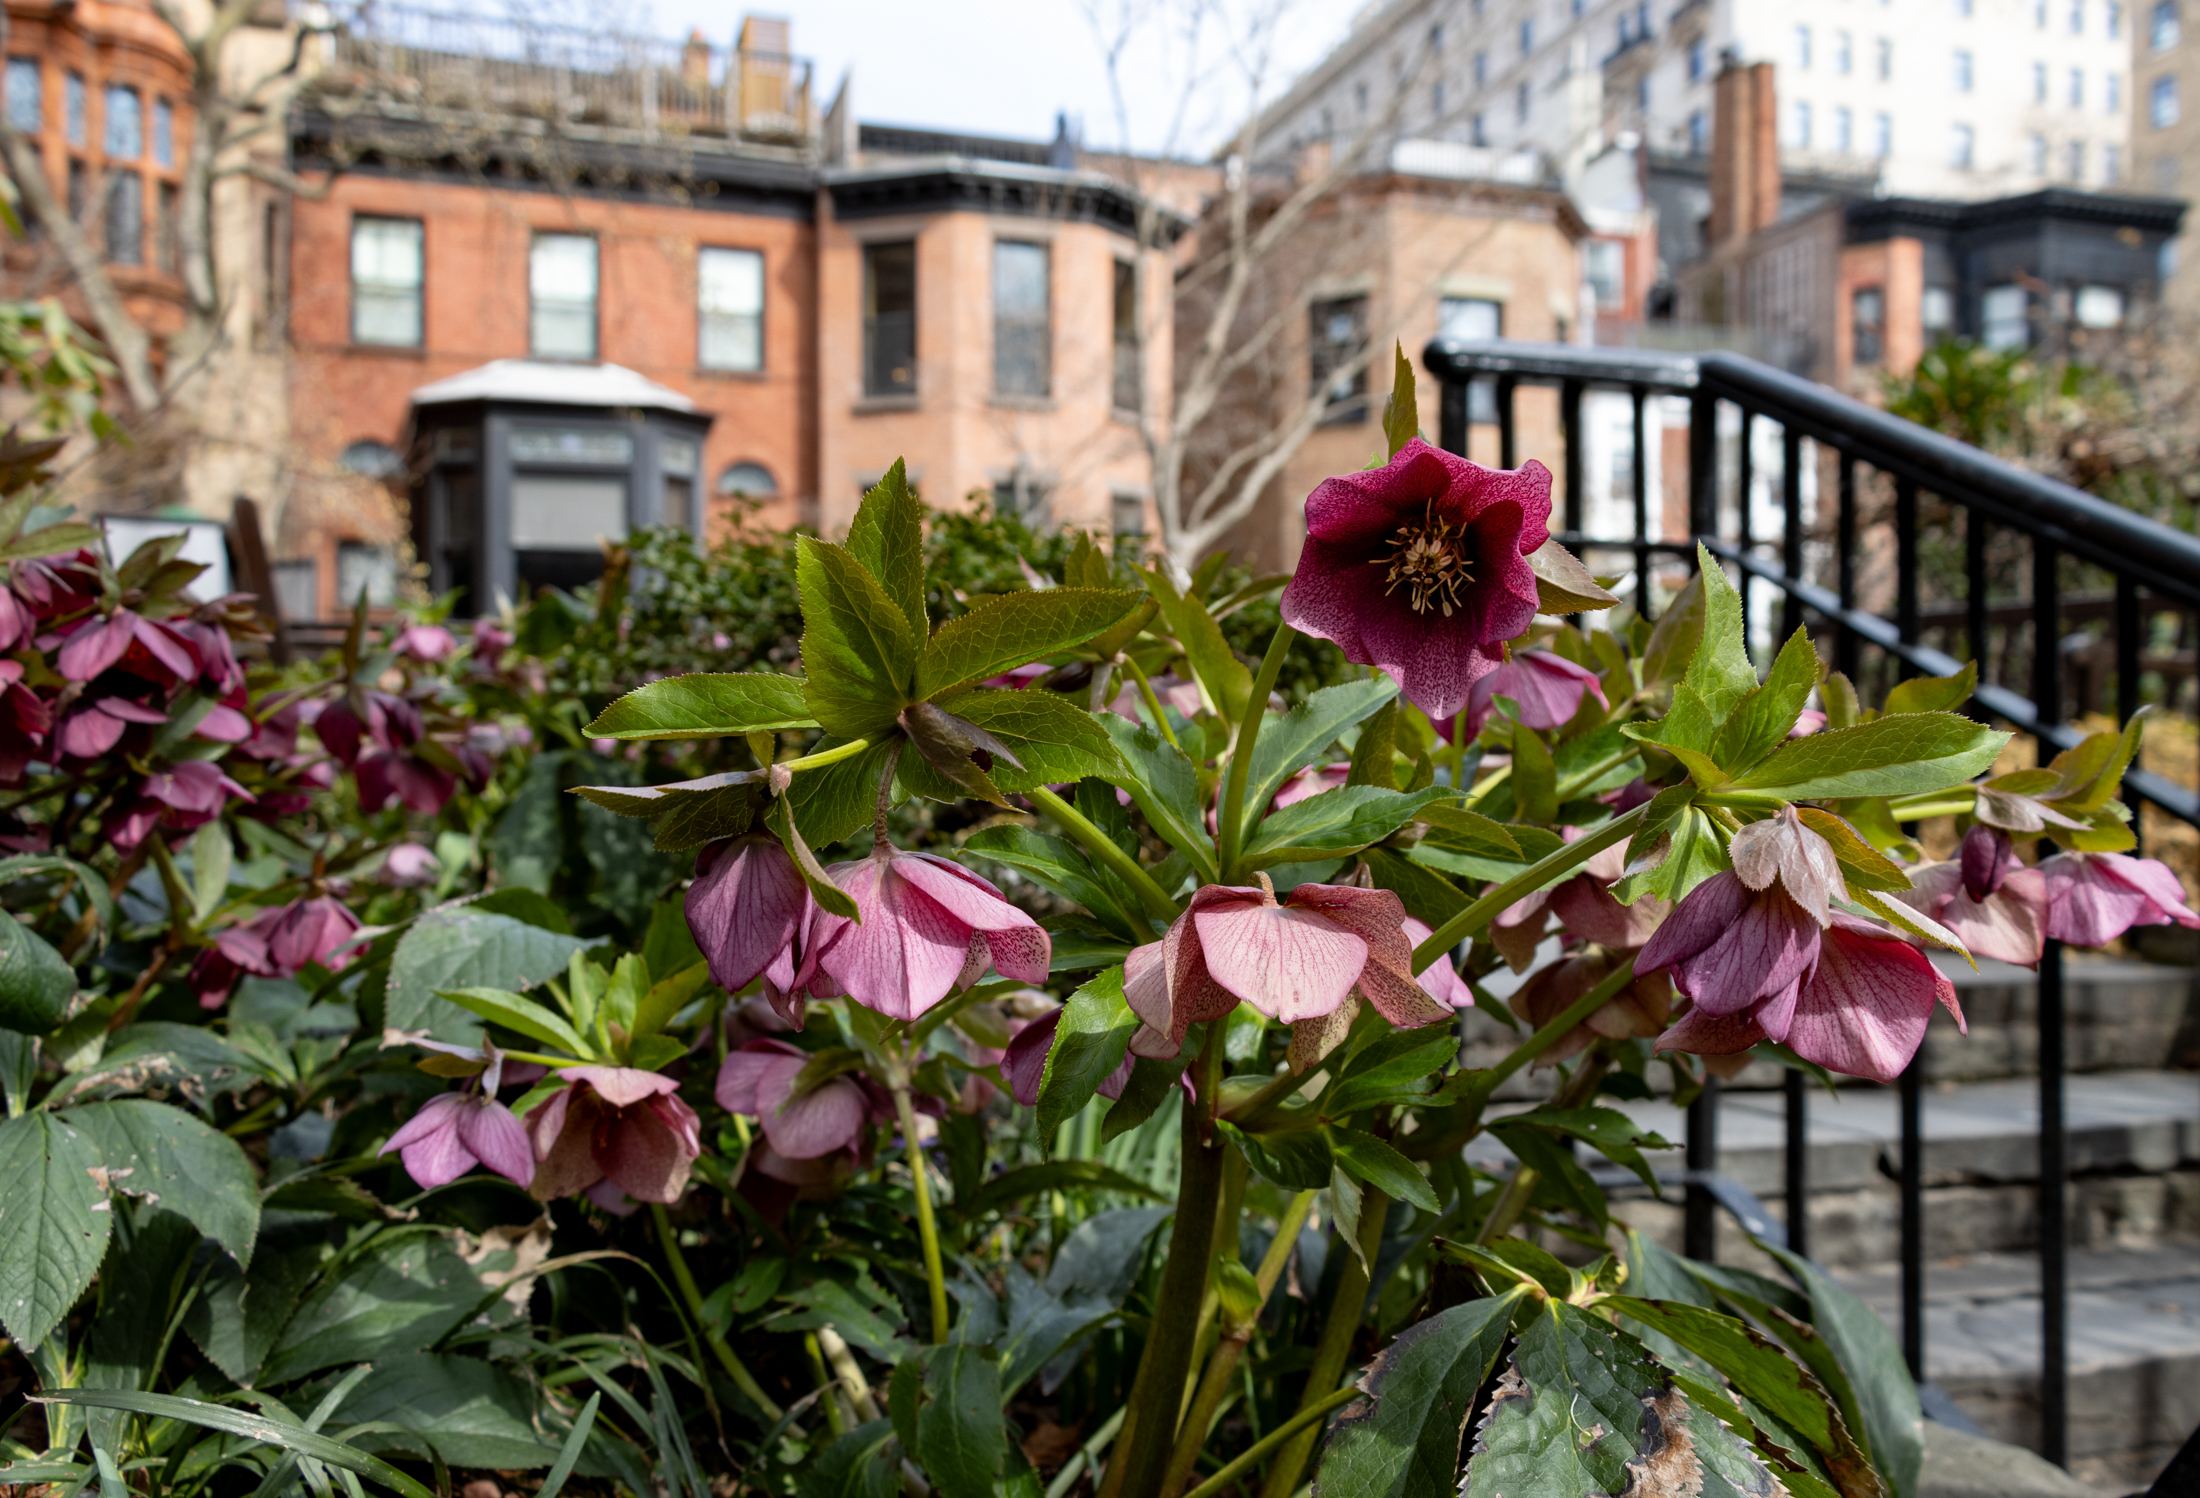 brooklyn - pink hellebores blooming in a garden on grace court